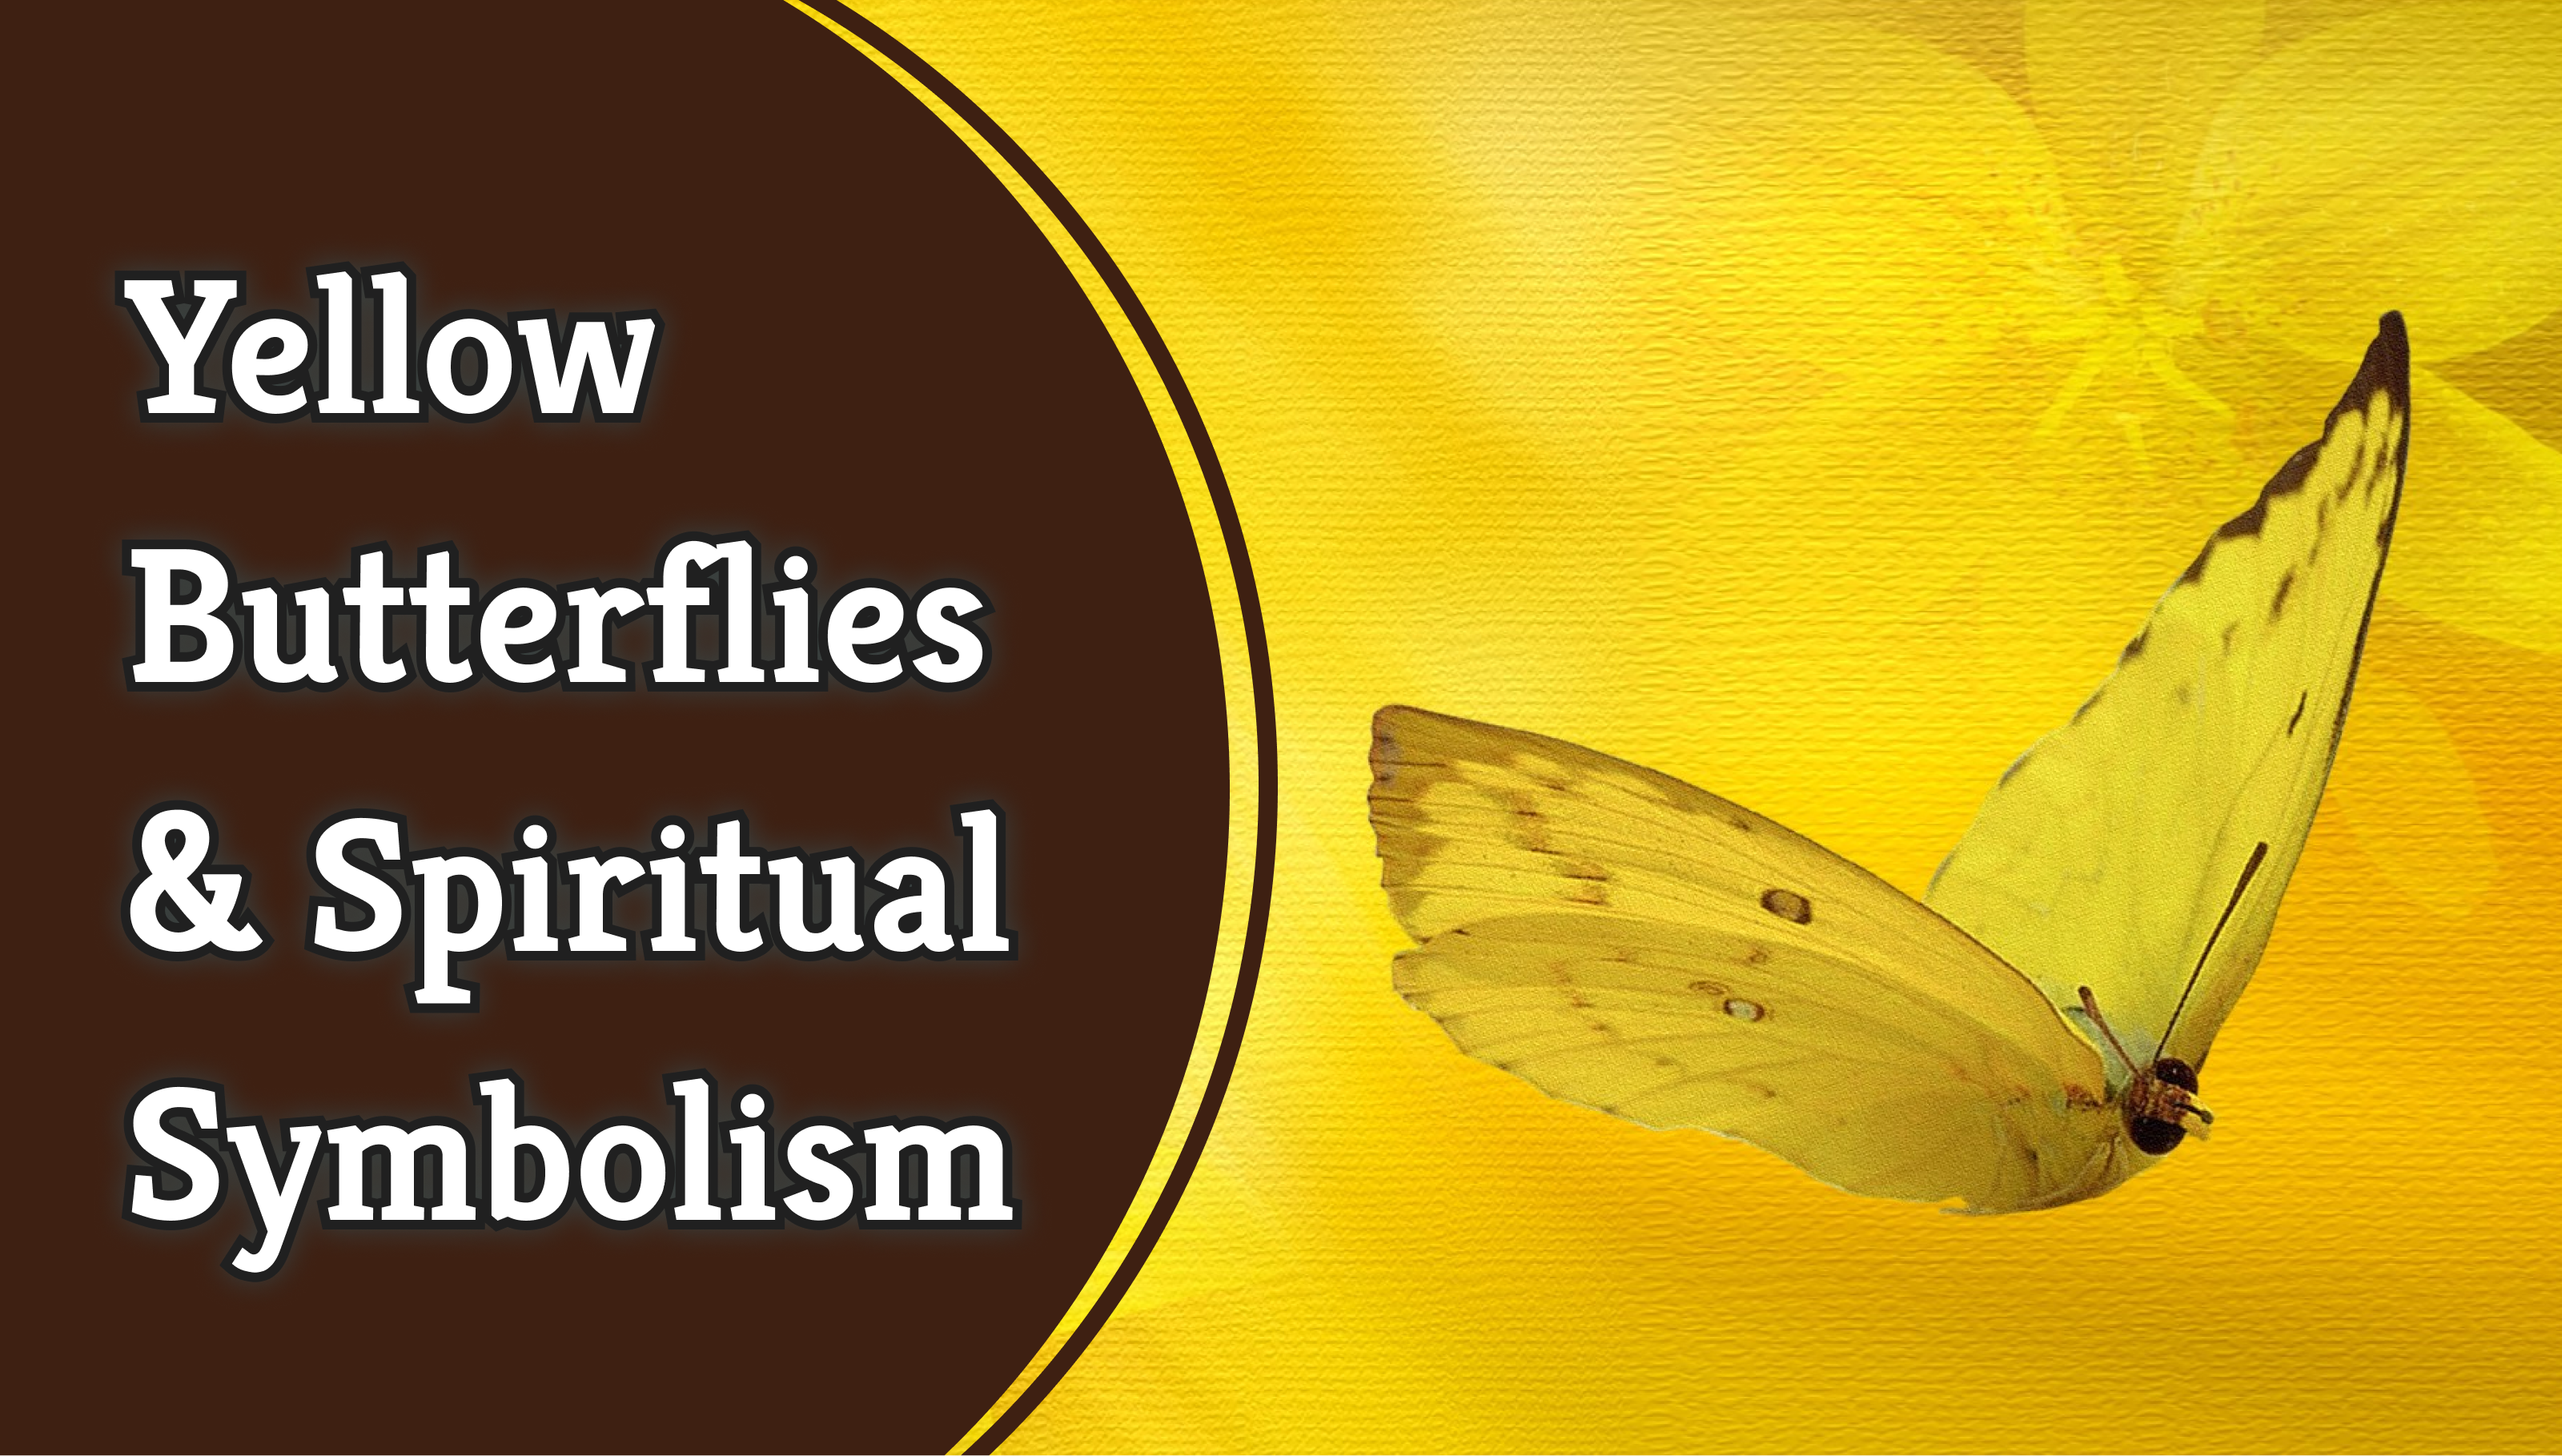 Meaning of Yellow Butterfllies & Spiritual Symbolism